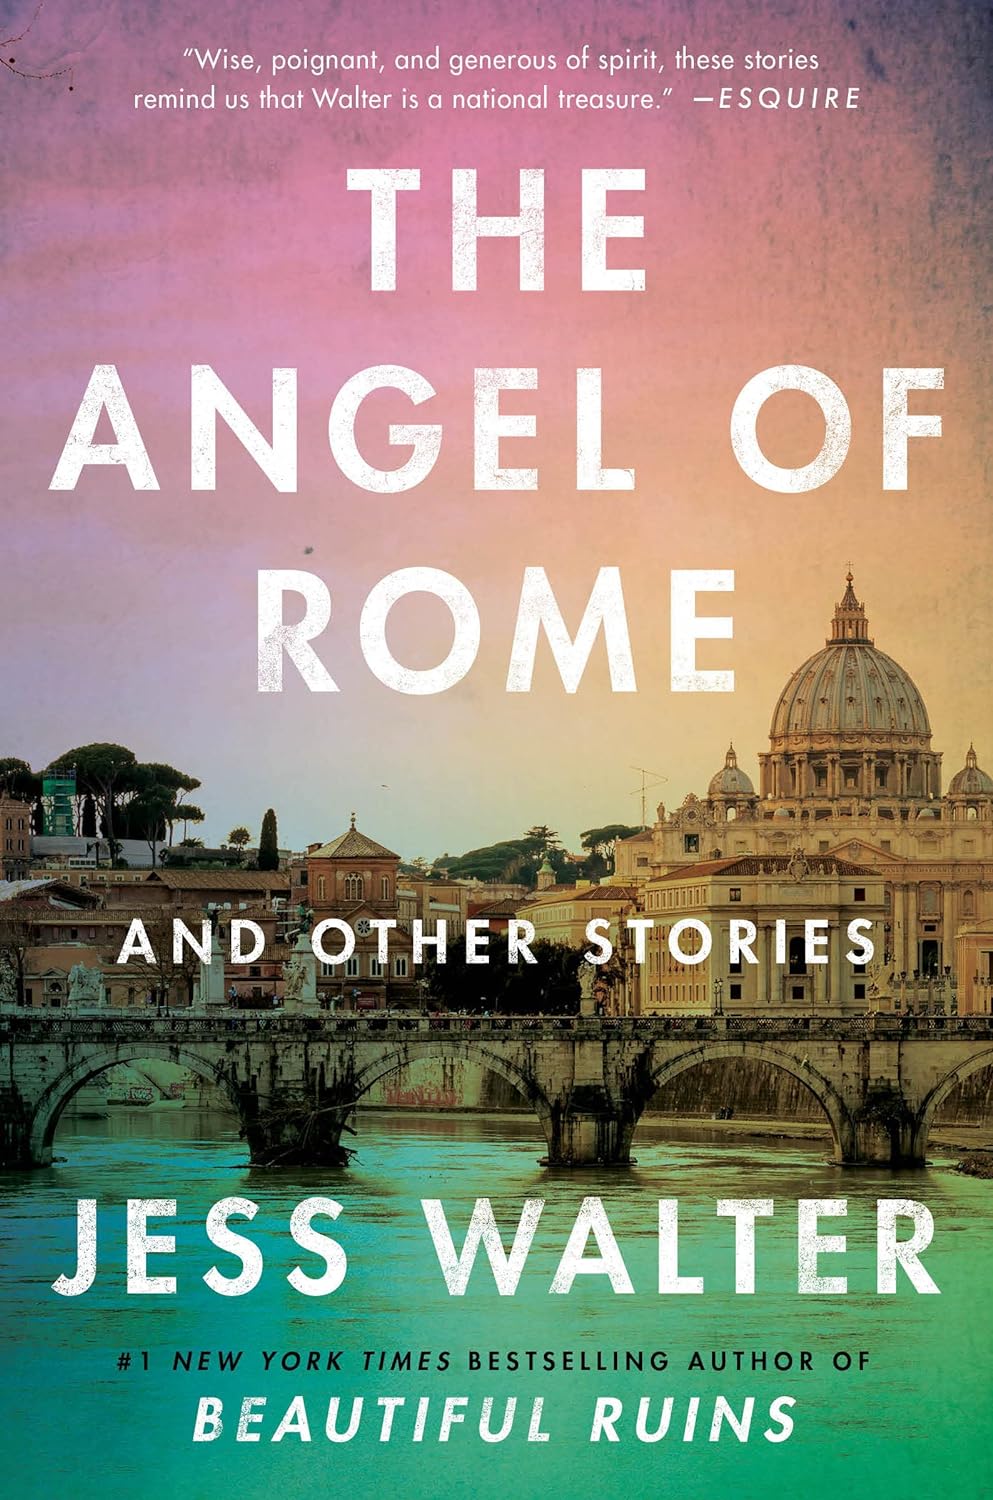 The Angel of Rome: And Other Stories by Jess Walter